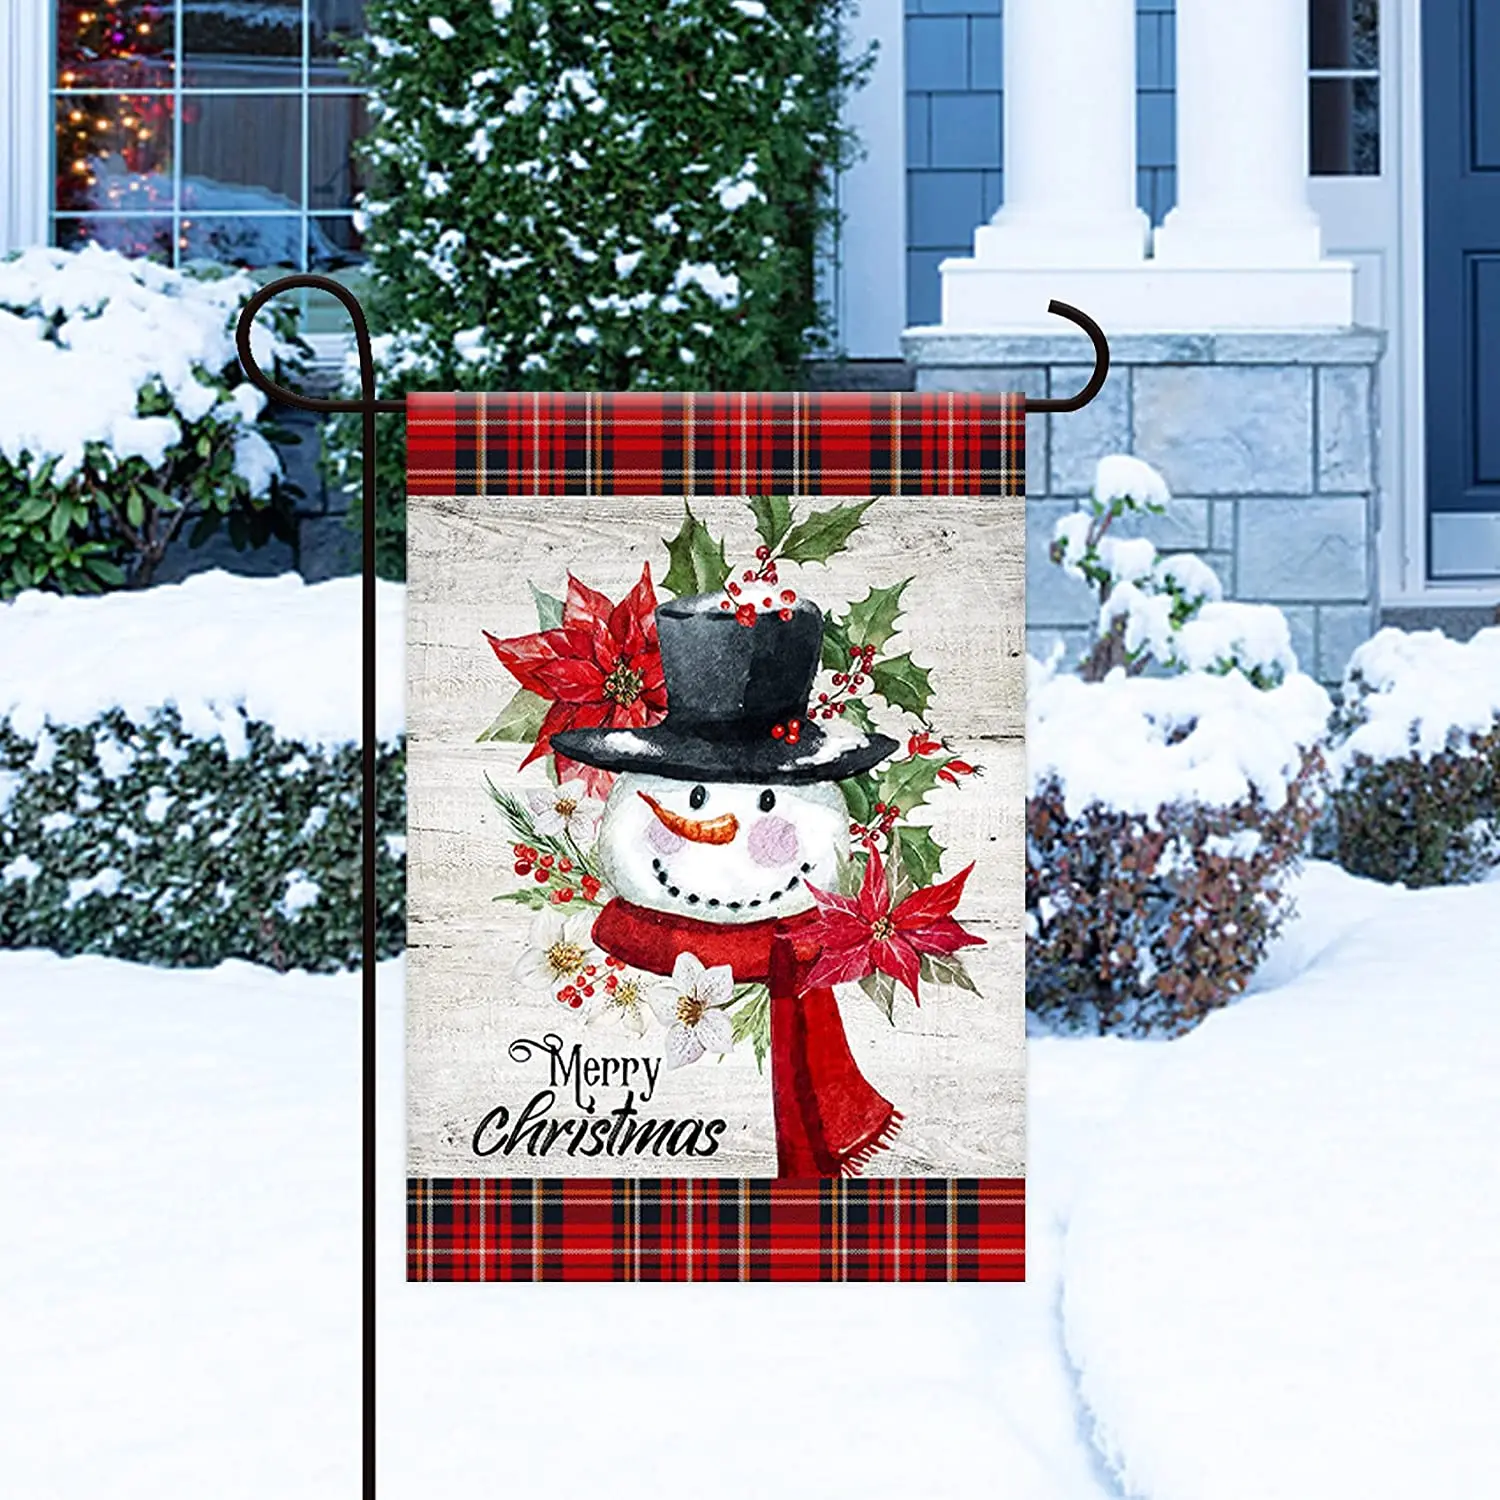 

Merry Christmas Holly Jolly Snowman Outdoor Yard Flag Decorative Winter Garden Flag Banner for Outside House Yard Home Decorativ